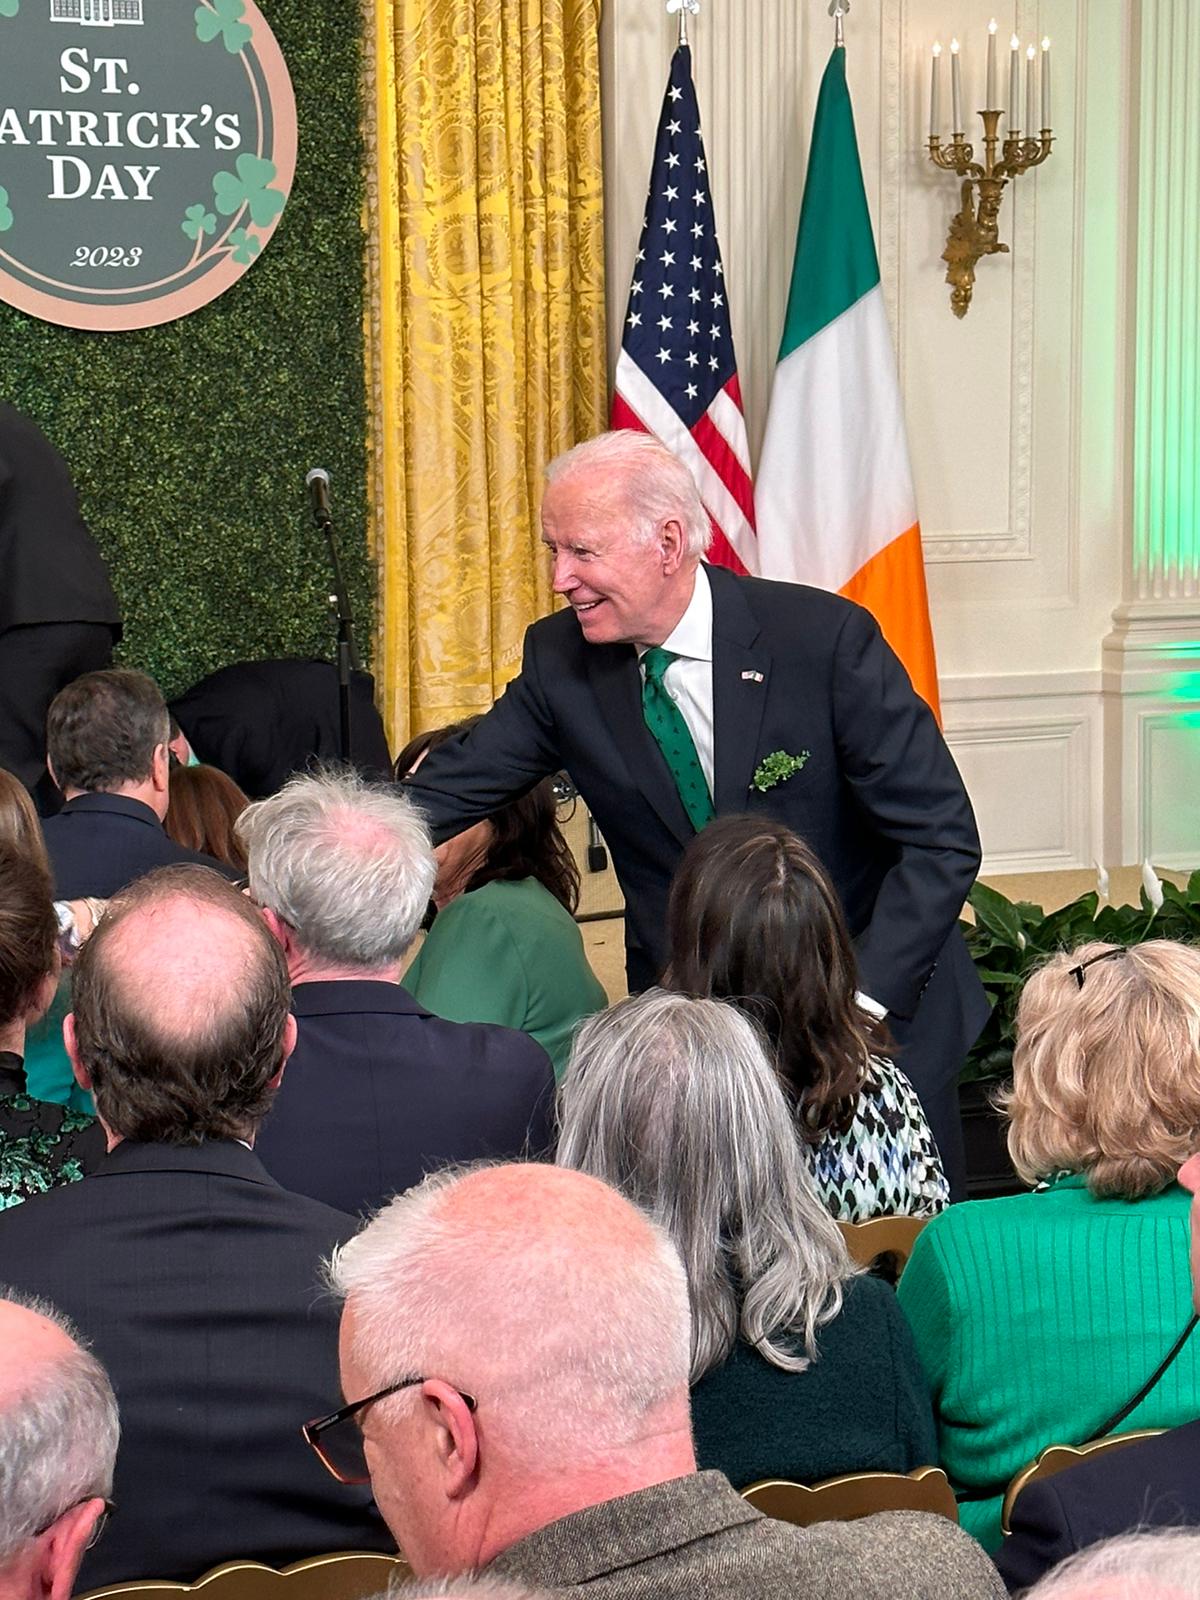 US President Joe Biden greets guests at the White House in Washington DC as part of the 2023 St Patrick's Day celebrations